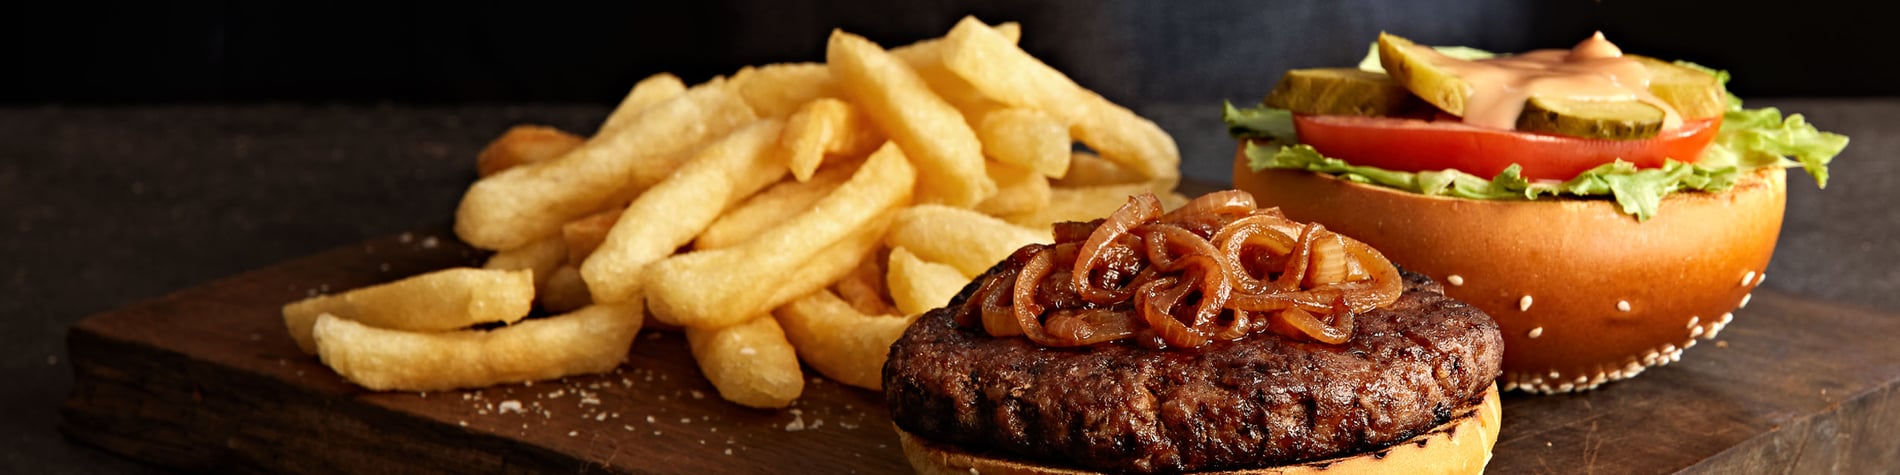 Beef burger and chips on a wooden board against a grey background.